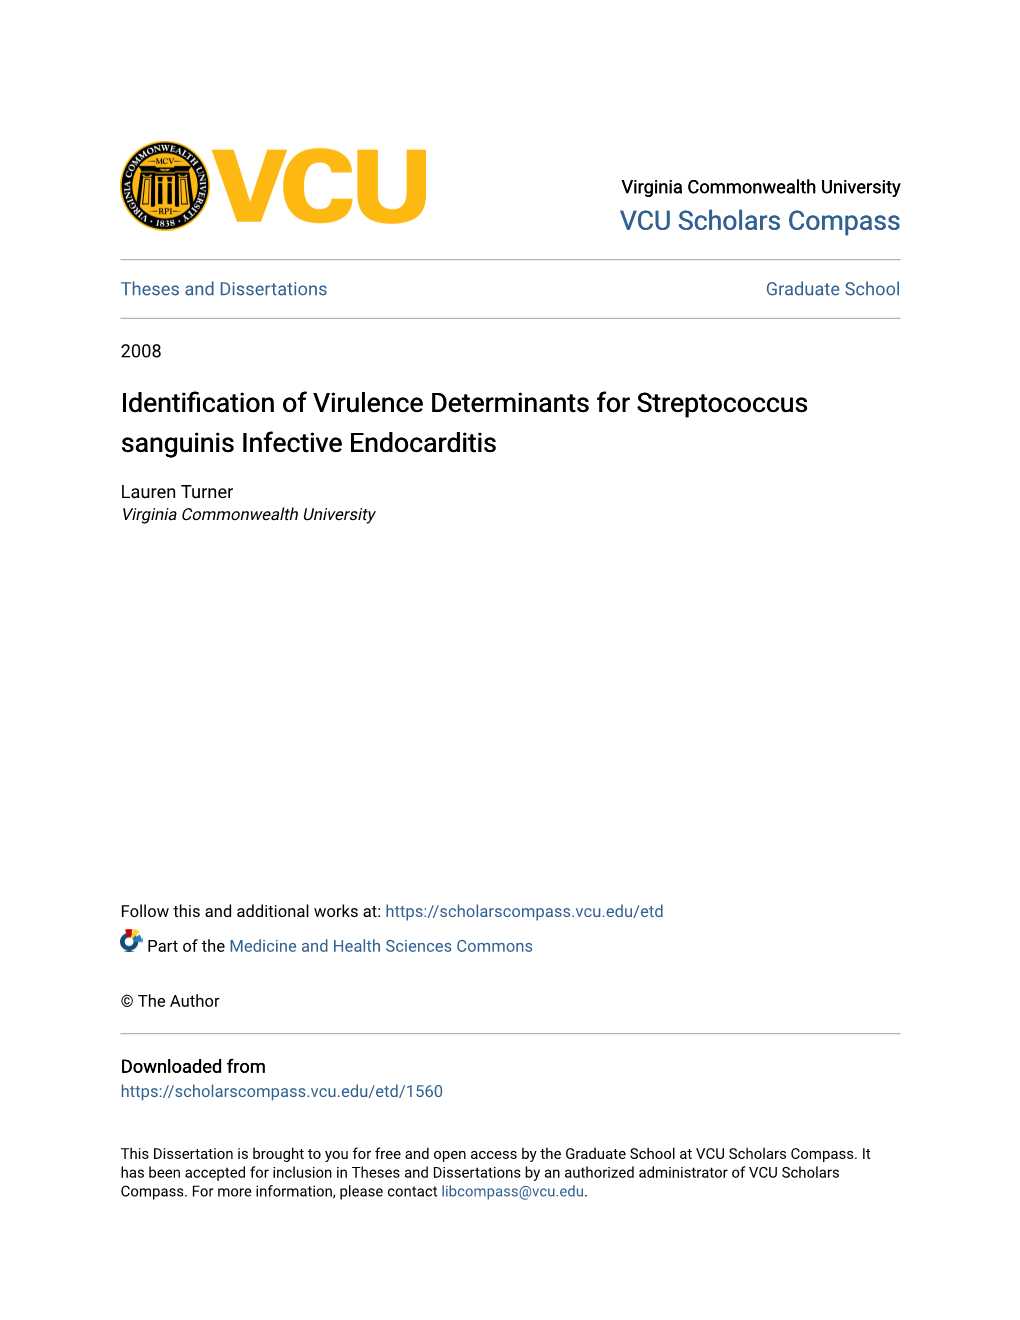 Identification of Virulence Determinants for Streptococcus Sanguinis Infective Endocarditis